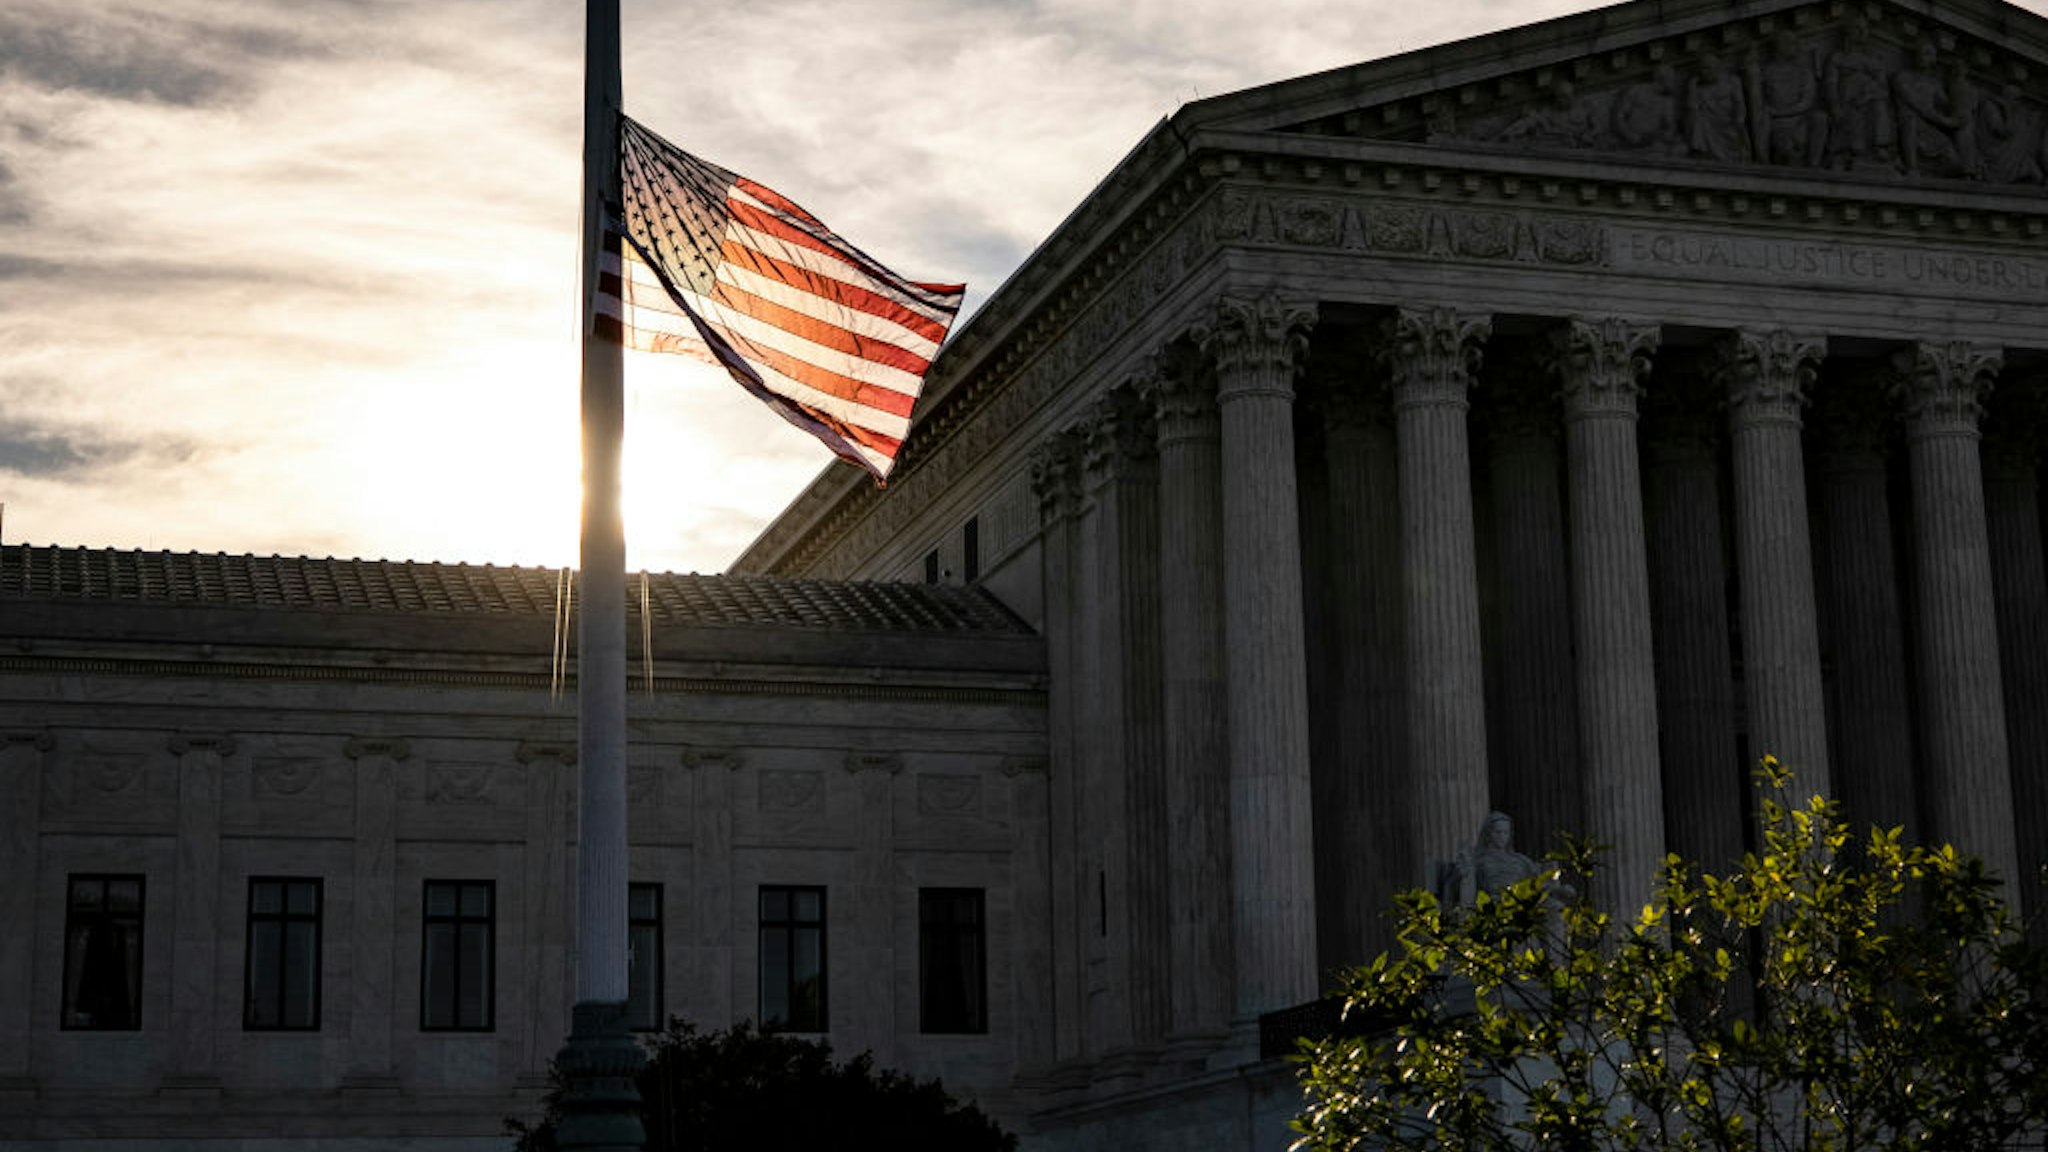 WASHINGTON, DC - SEPTEMBER 19: The American flag flies at half staff the morning after the death of Supreme Court Justice Ruth Bader Ginsburg in front of the US Supreme Court on September 19, 2020 in Washington, DC. Justice Ginsburg has died at age 87 after a battle with pancreatic cancer.